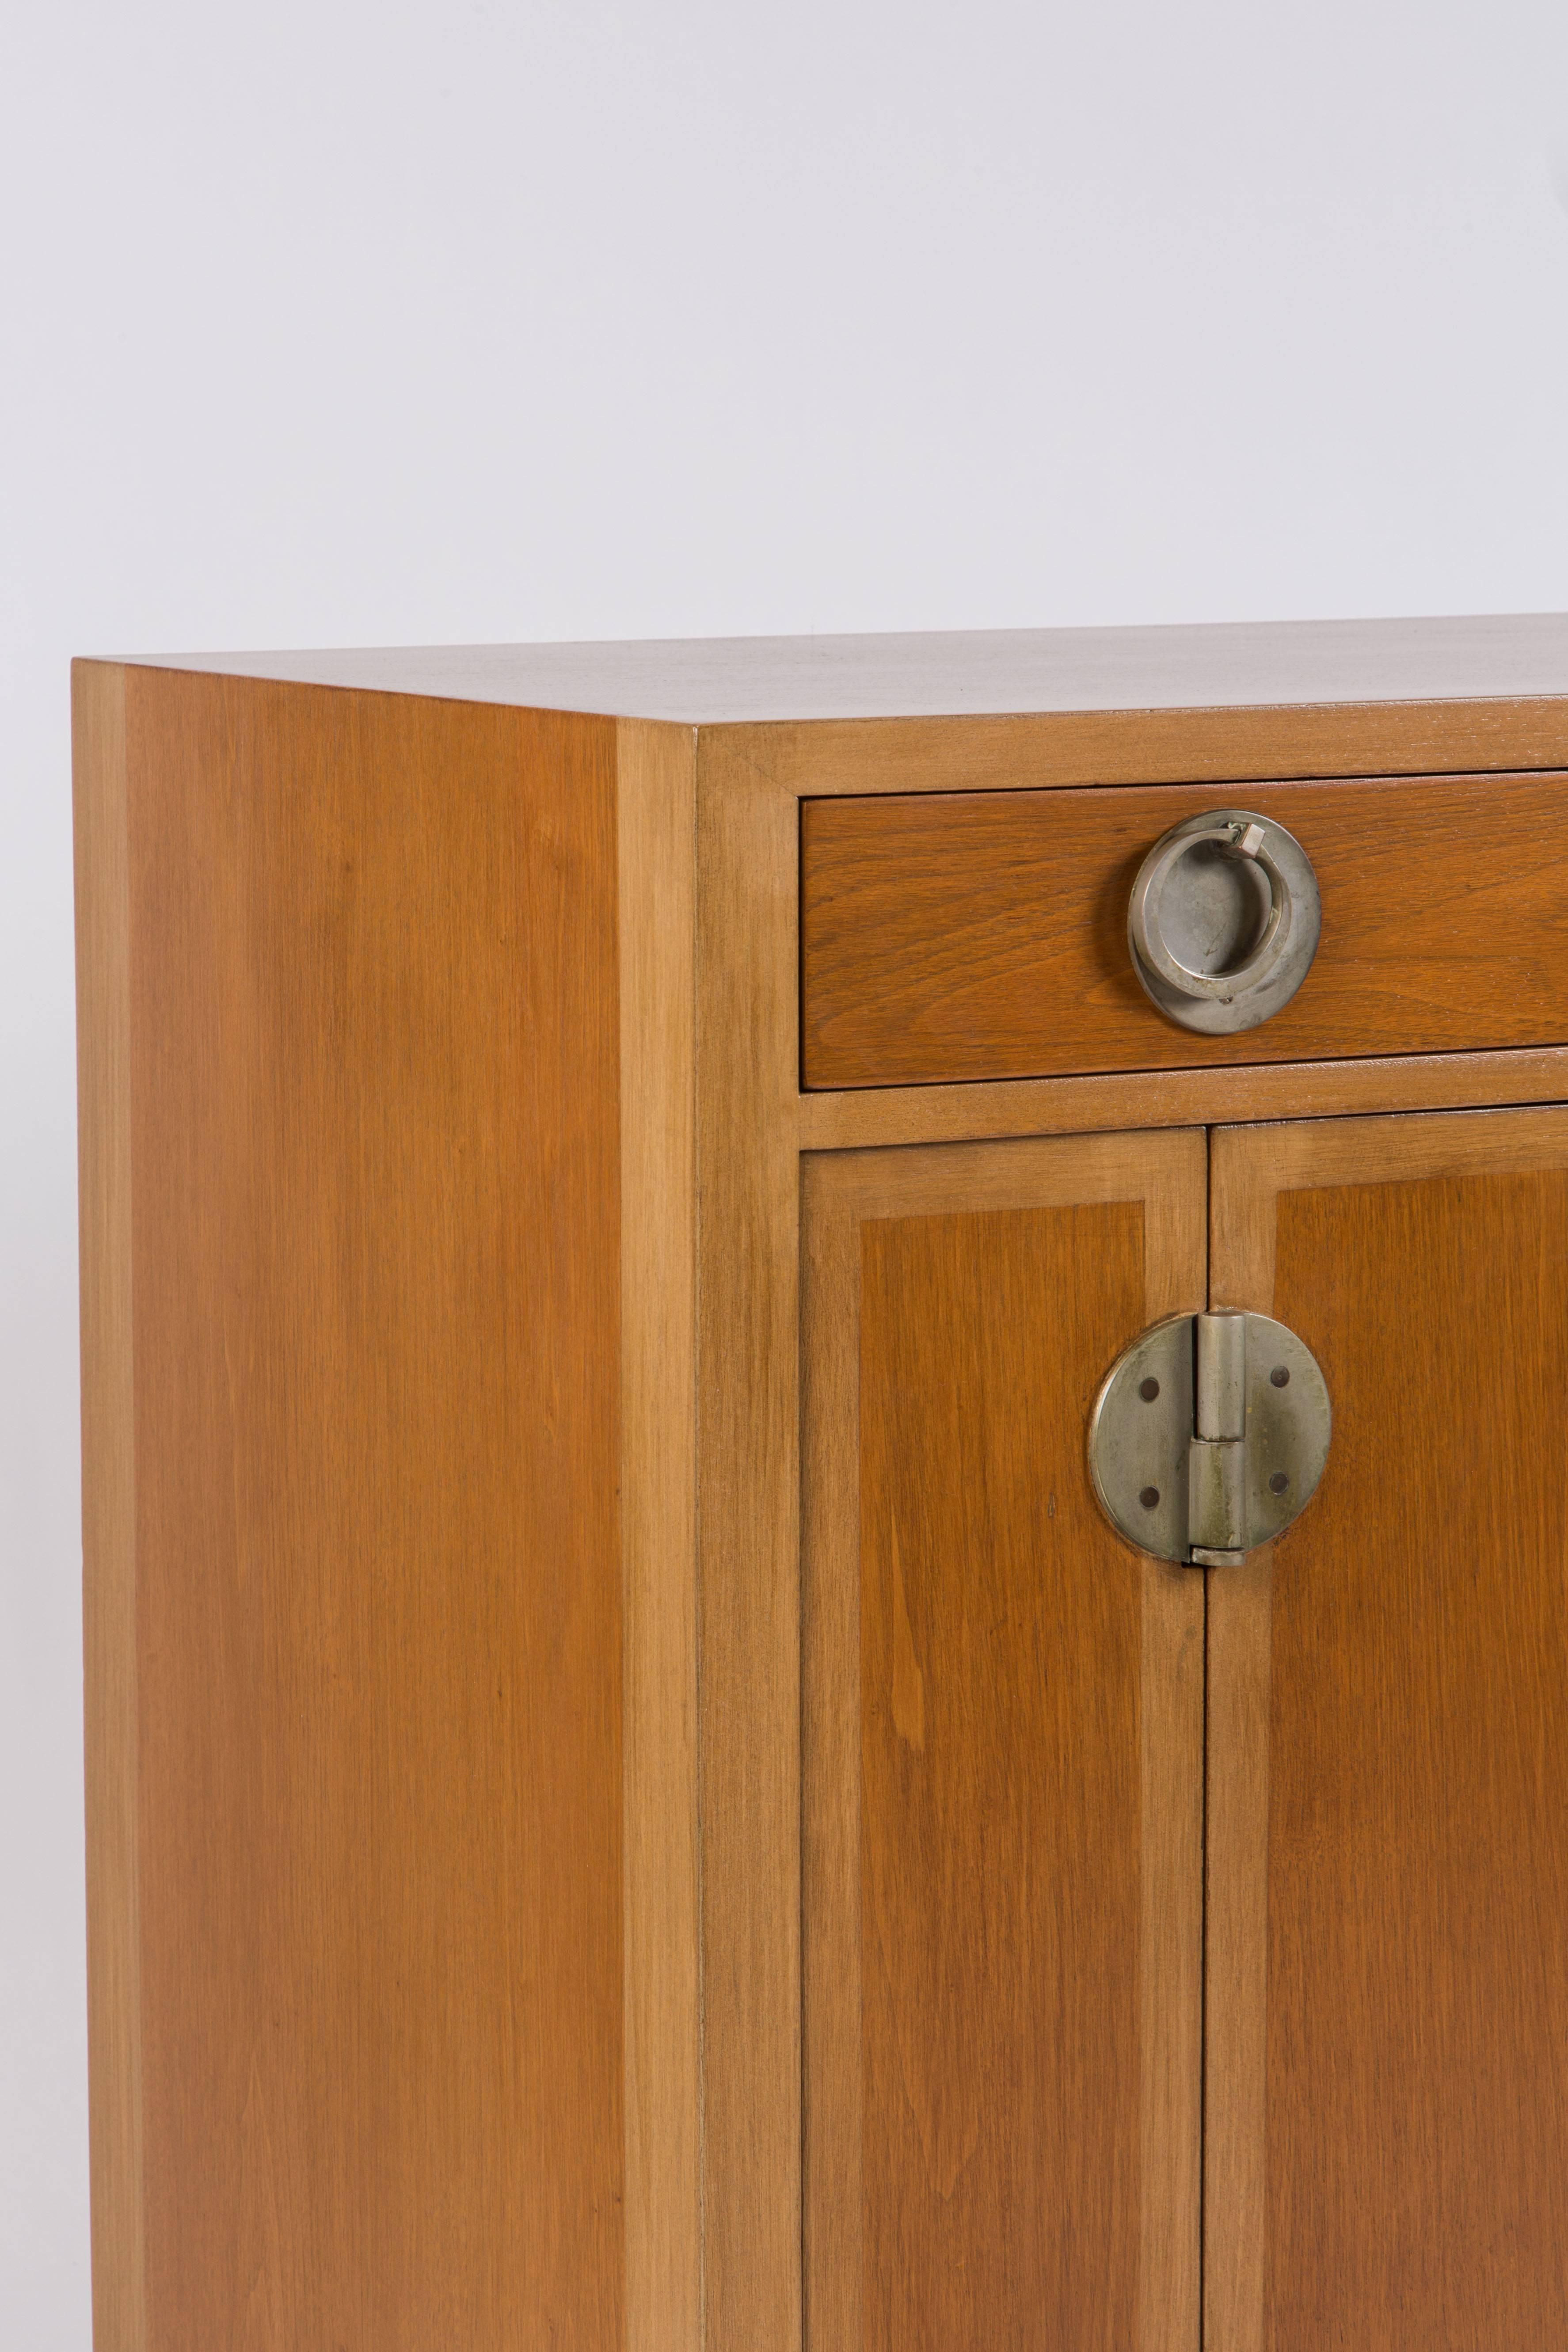 Timeless cabinet with Chinese design accents, by renown American Mid-Century designer Edward Wormley for Dunbar. With two tone bleached Mahogany veneers and brass hardware recalling the hardware used on traditional Chinese furniture. With green